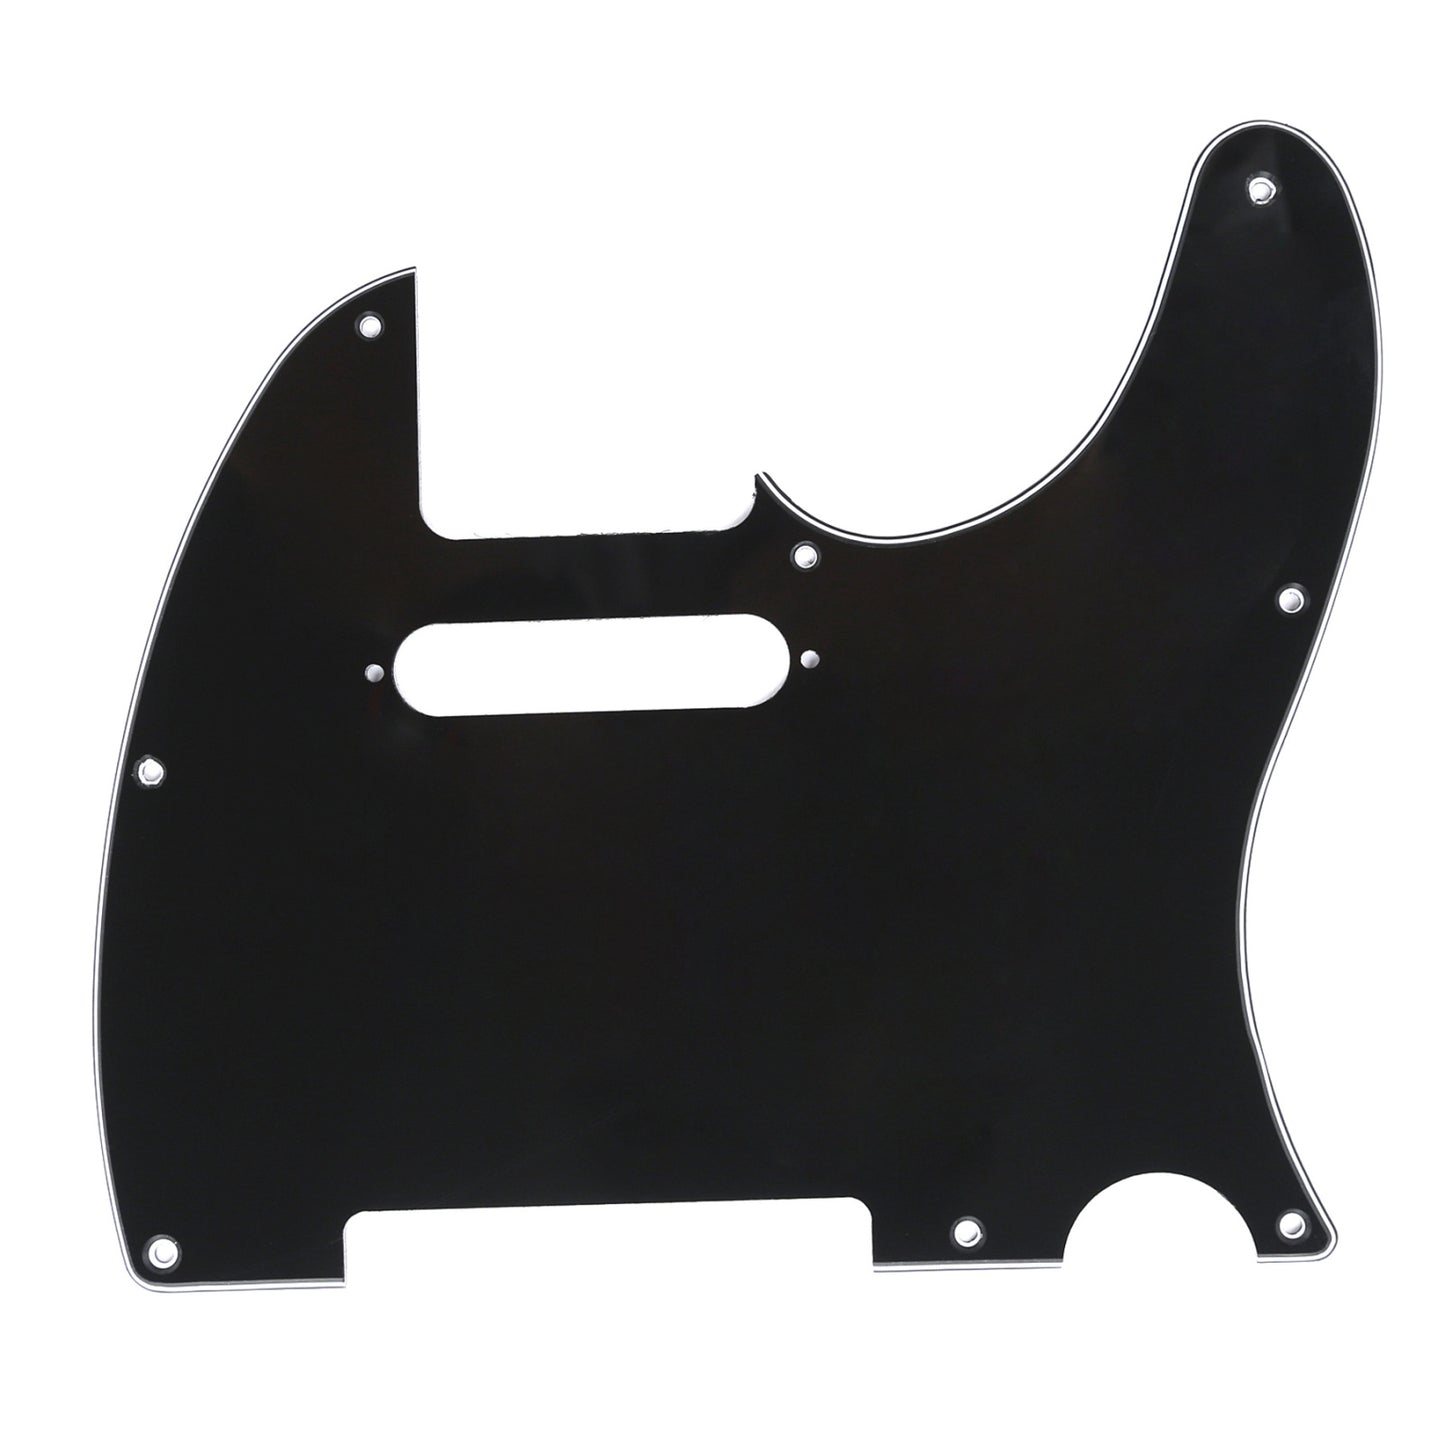 Musiclily 8 Hole Tele Guitar Pickguard for USA/Mexican Made Fender Standard Telecaster Modern Style , 3Ply Black